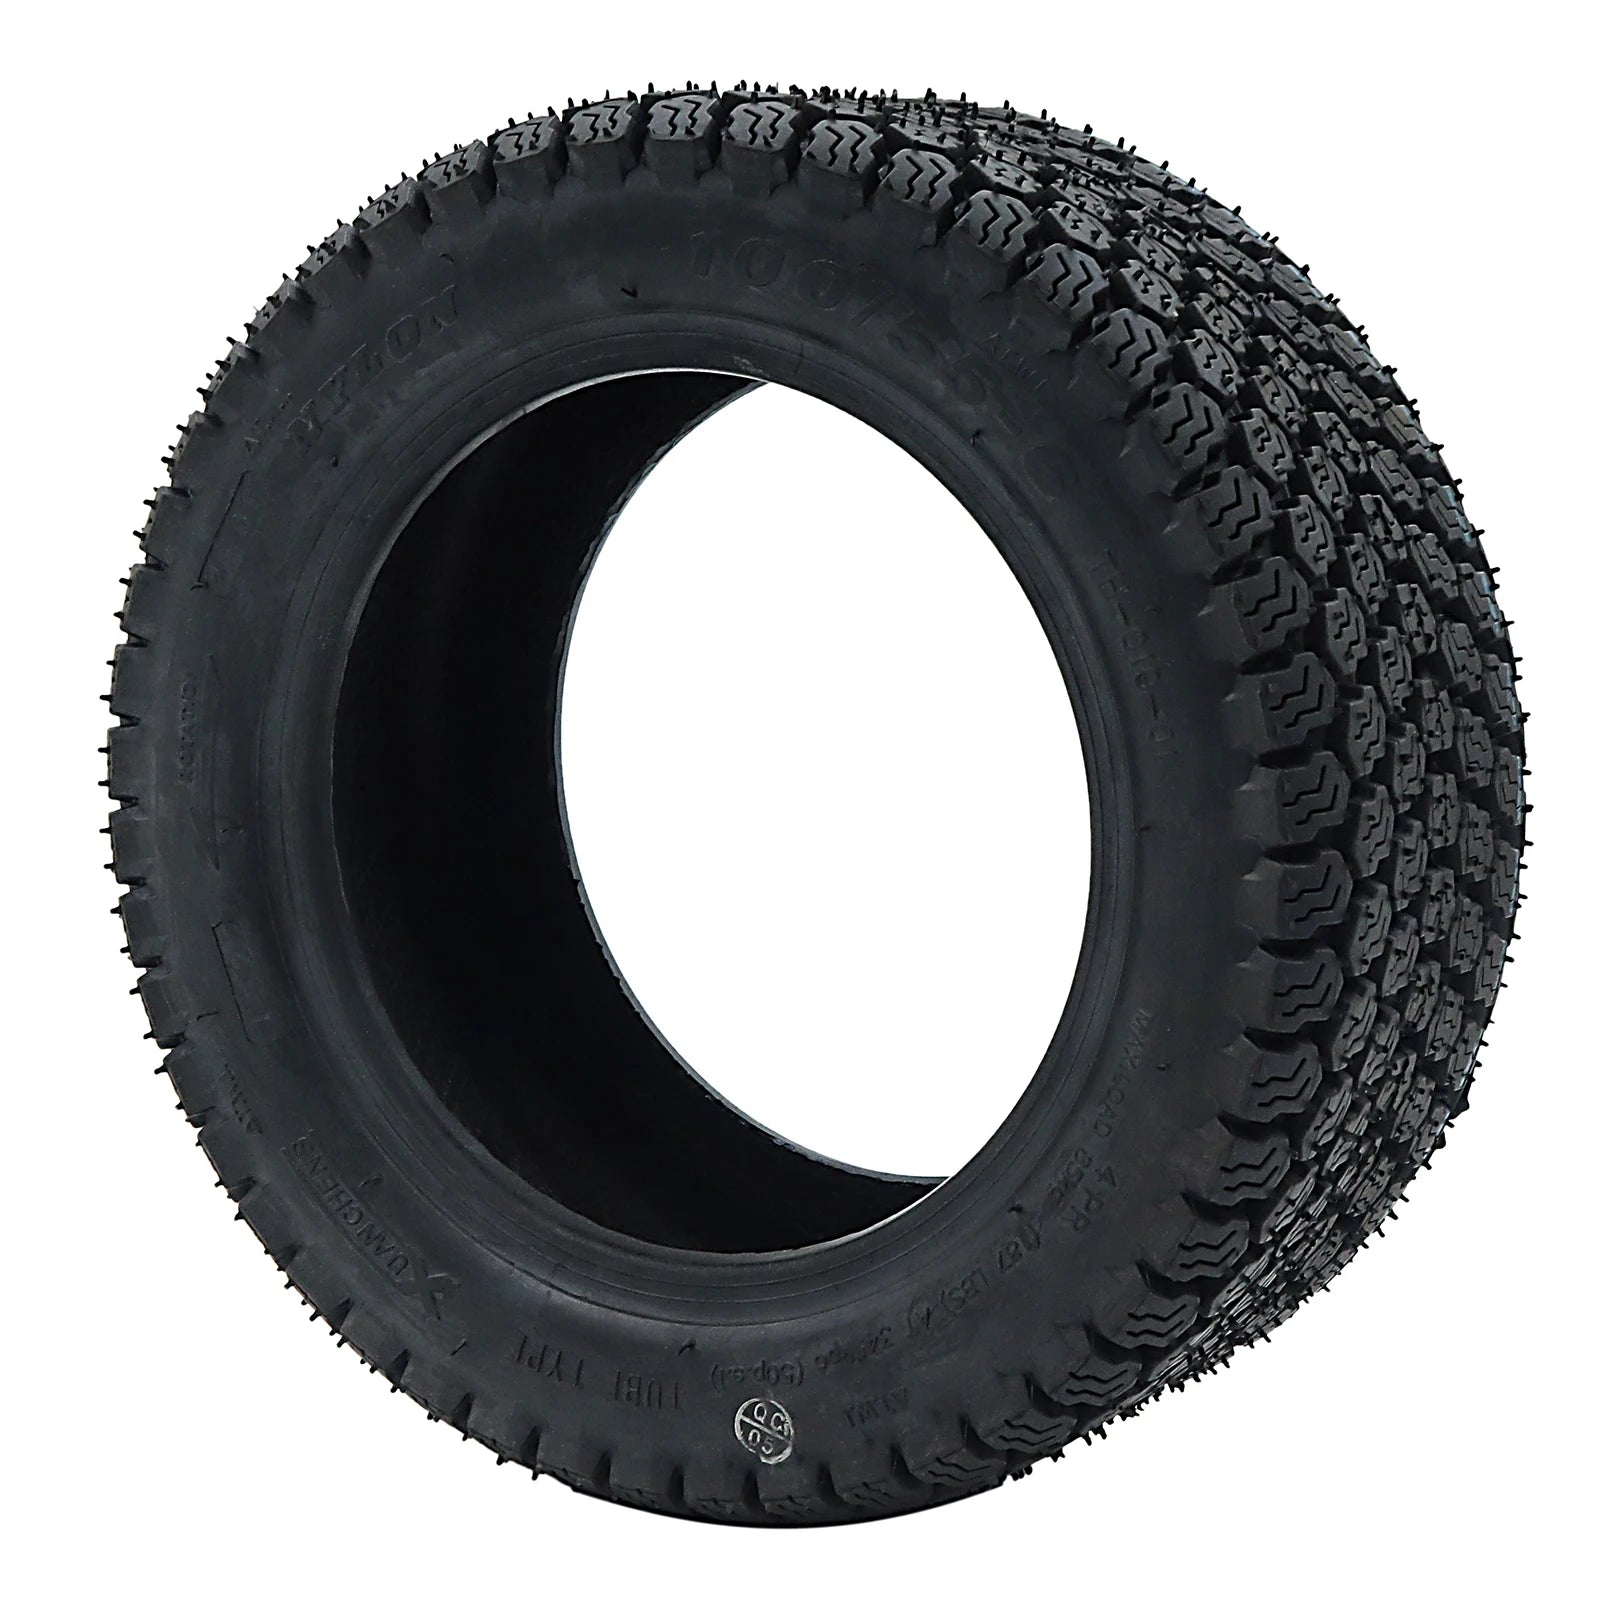 100 / 55-6 Suitable for Electric Scooter Tires, Fat Tires, Expressway Inflation, Motorcycle, Bicycle, Golf Bike 11 Inch Tires